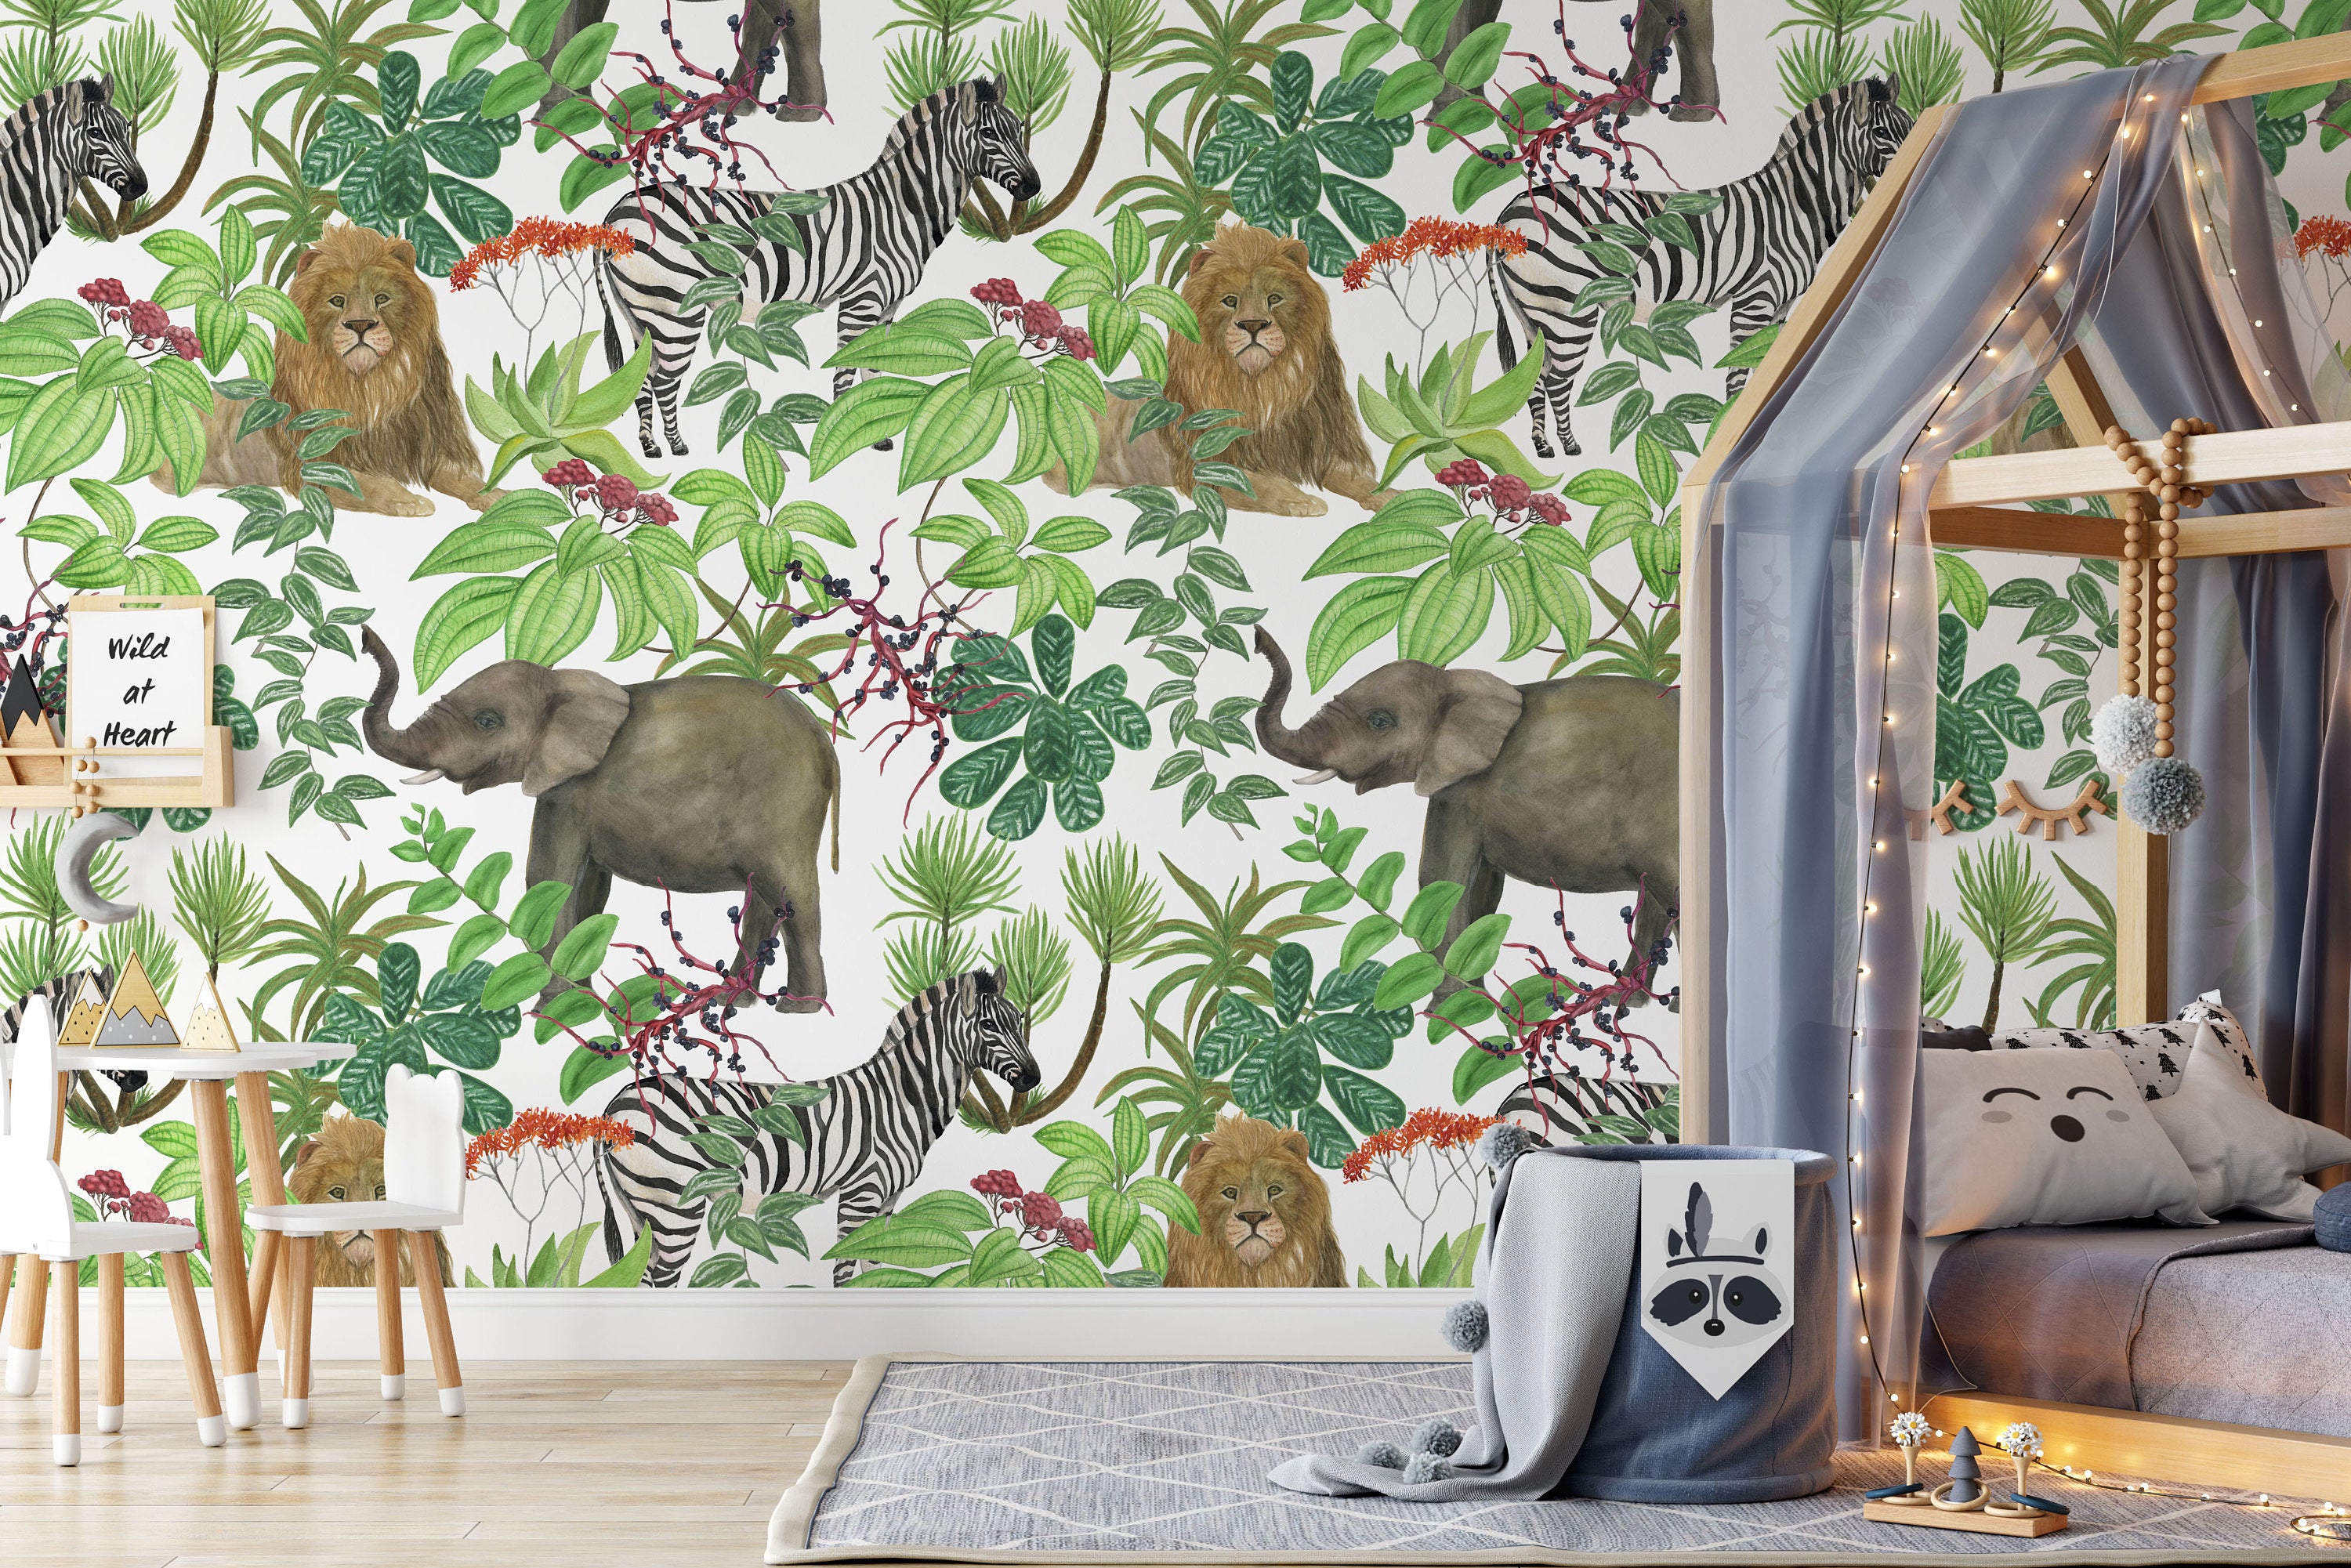 Tropical Flowers African Animals Zebra Elephant Lion Wallpaper Self Adhesive Peel and Stick Wall Sticker House Design Removable